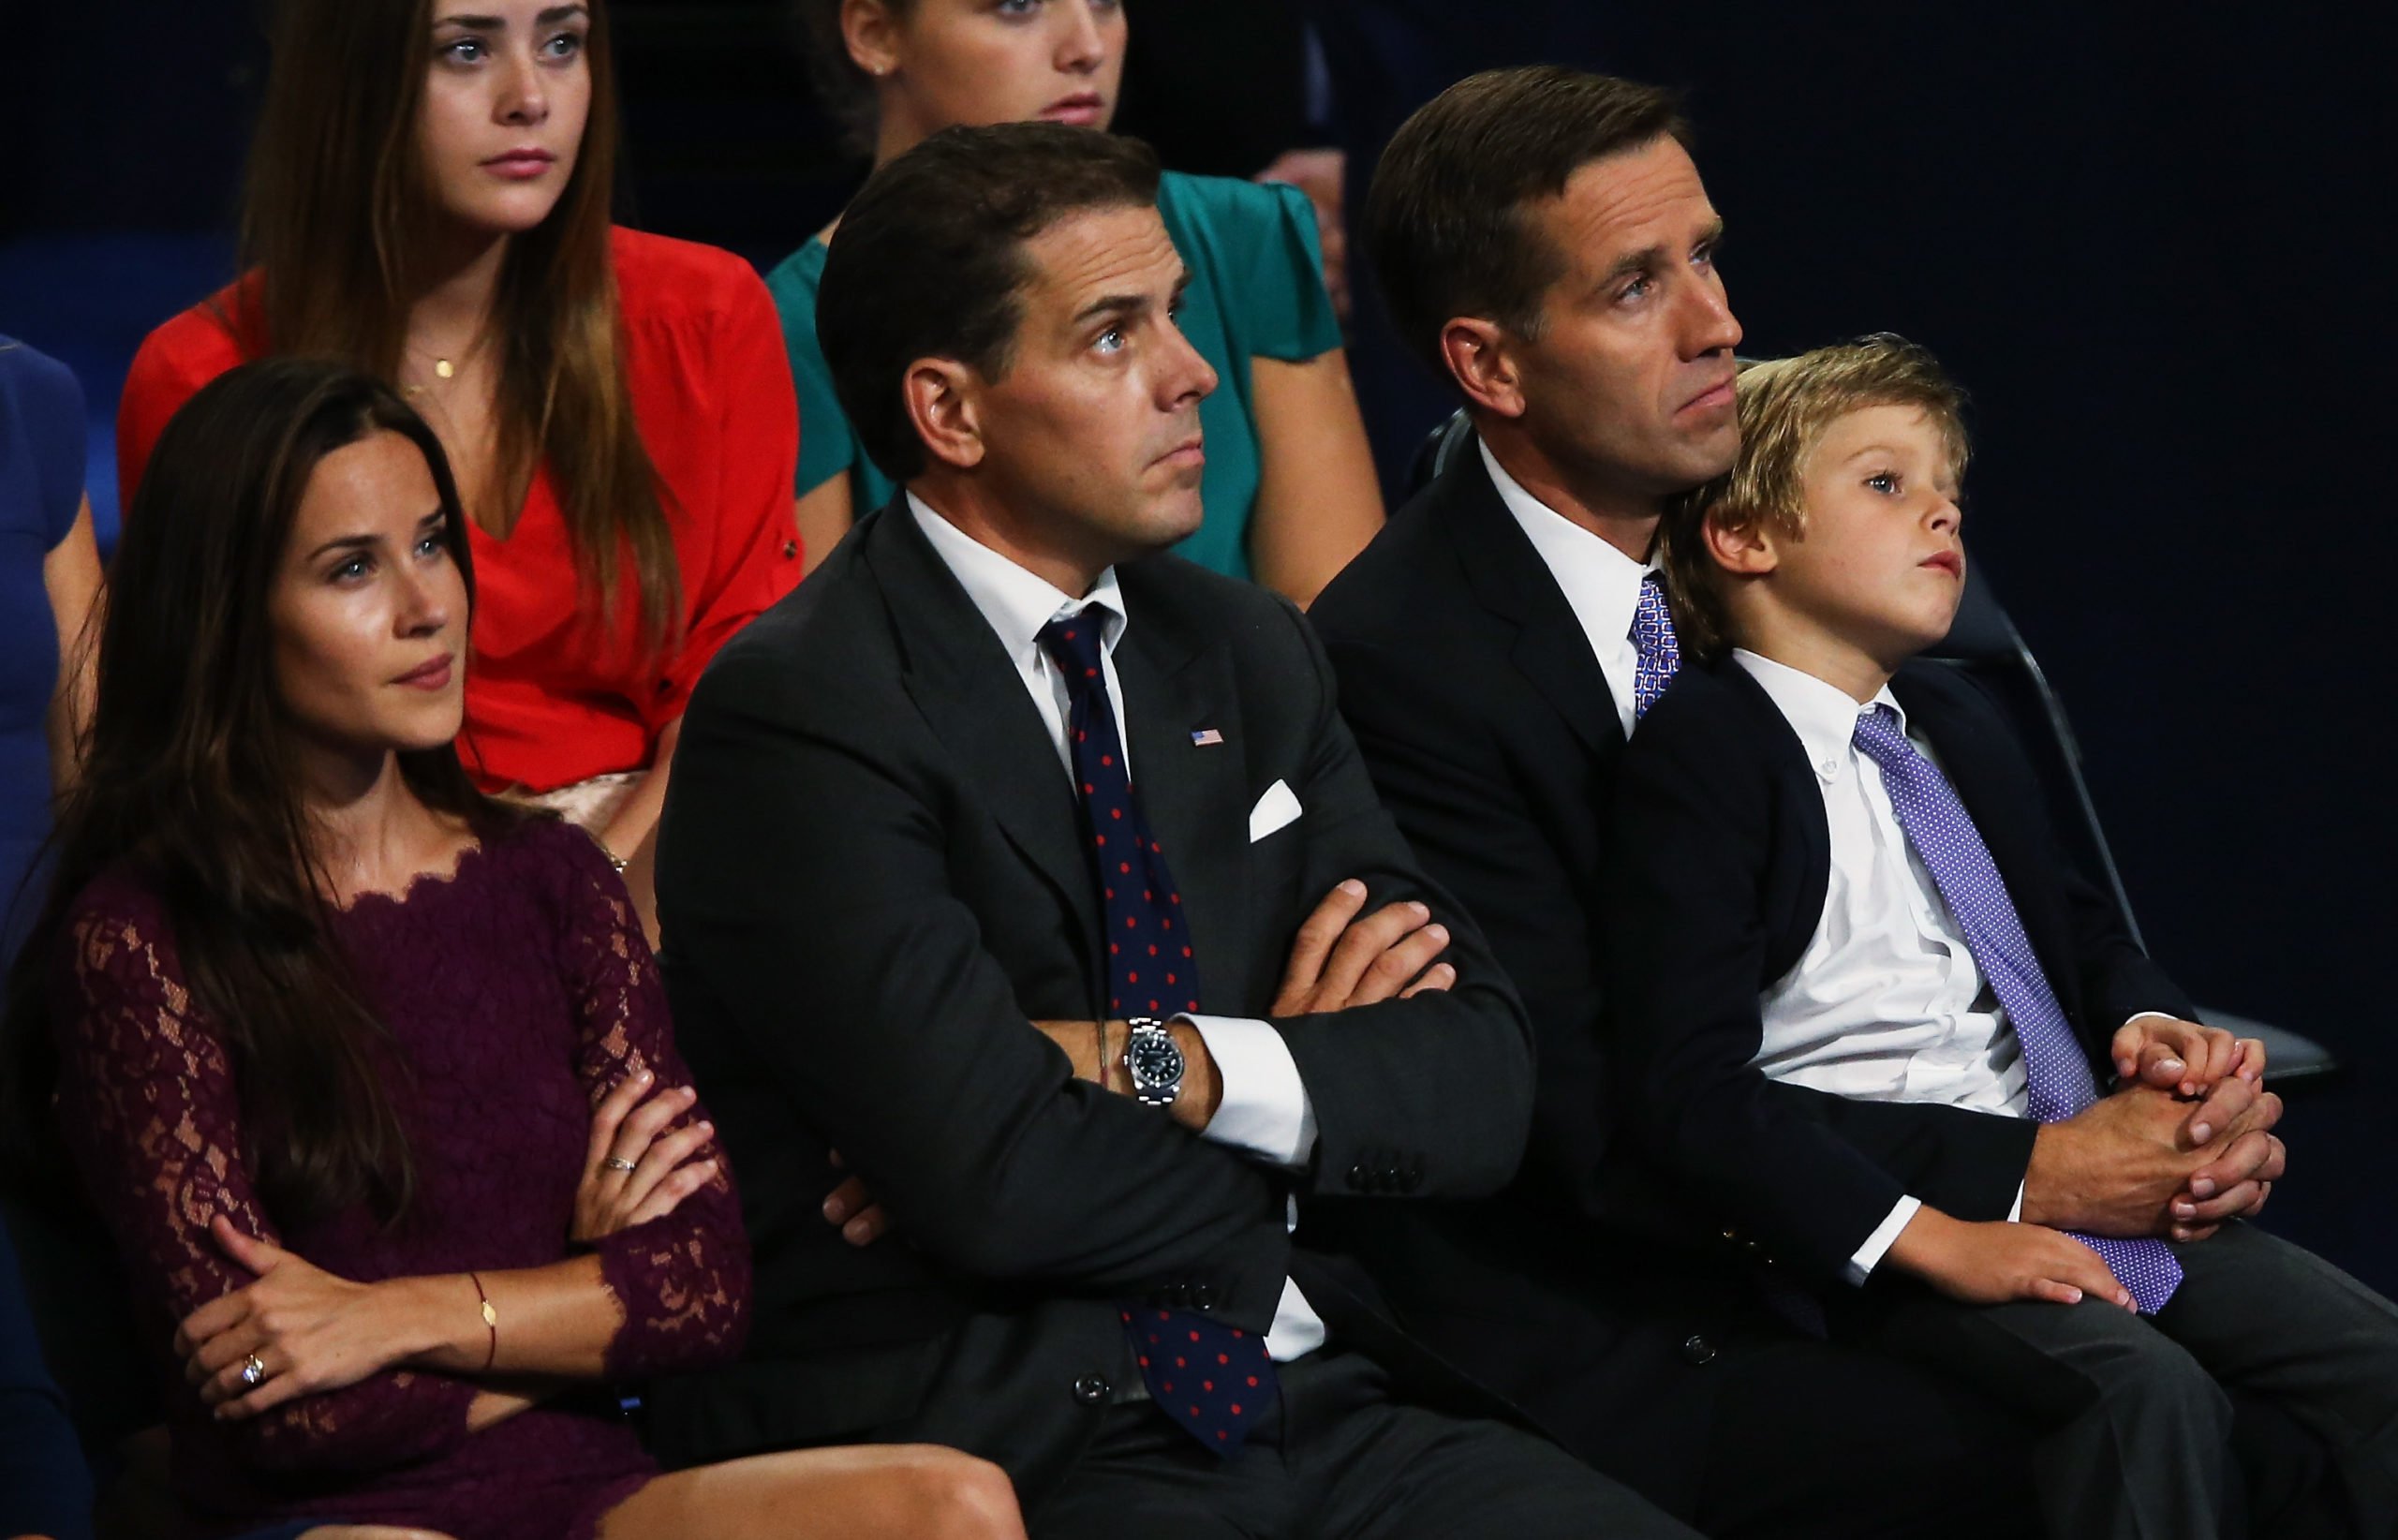 CHARLOTTE, NC - SEPTEMBER 06: (R-L) Attorney General of Delaware Beau Biden, Hunter Biden, and Ashley Biden, watch their father Democratic vice presidential candidate, U.S. Vice President Joe Biden speaks on stage during the final day of the Democratic National Convention at Time Warner Cable Arena on September 6, 2012 in Charlotte, North Carolina. The DNC, which concludes today, nominated U.S. President Barack Obama as the Democratic presidential candidate. (Photo by Streeter Lecka/Getty Images)